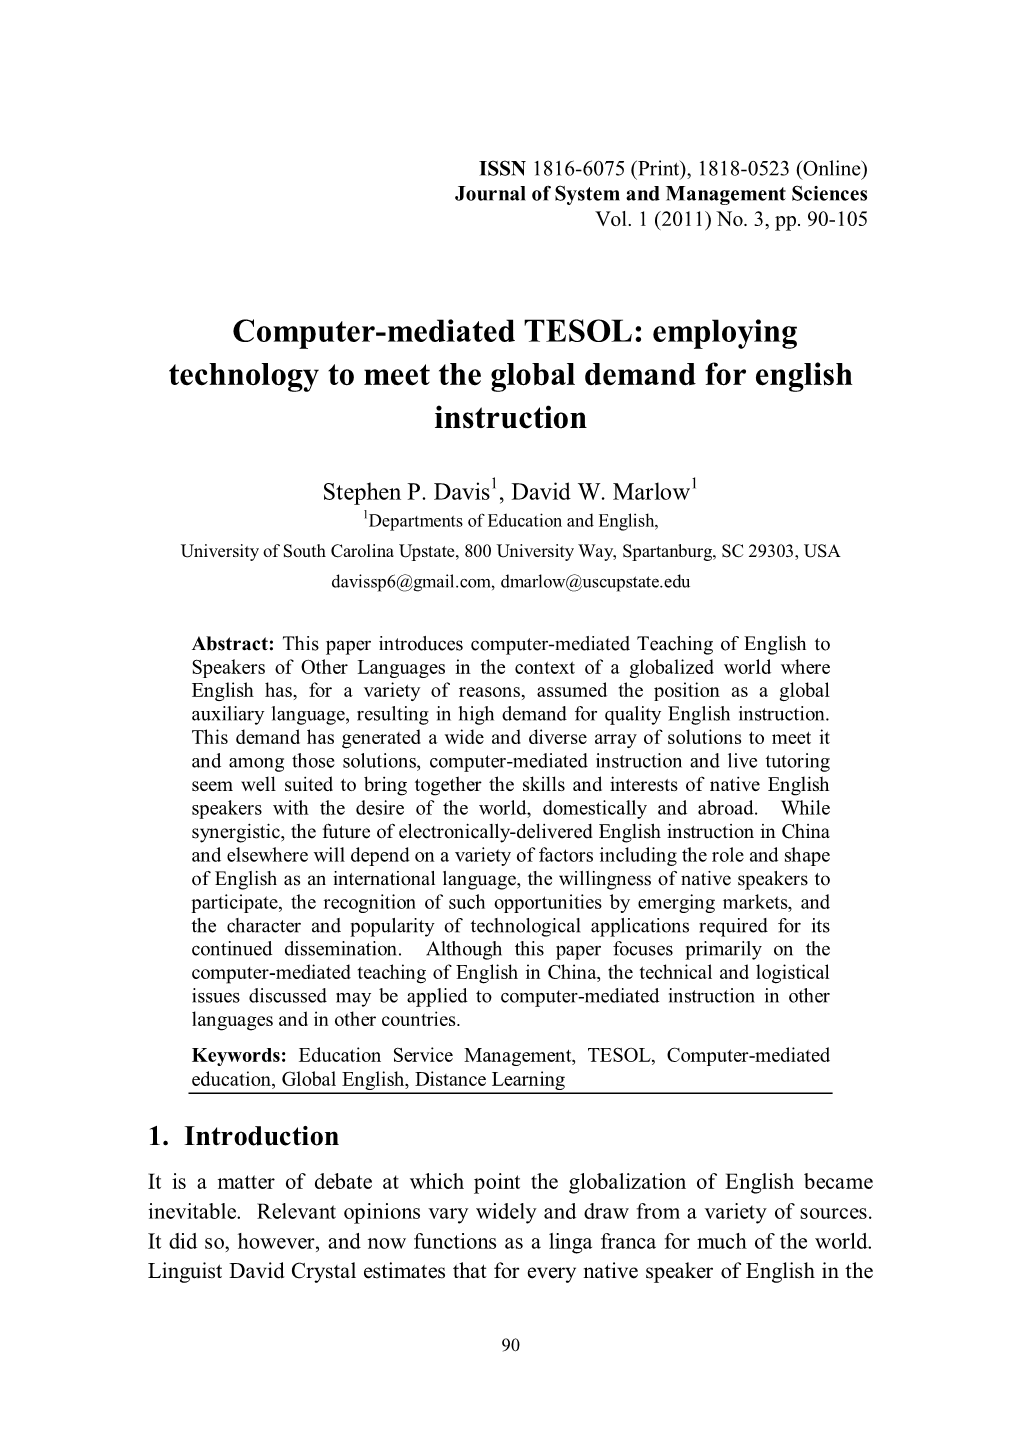 Computer-Mediated TESOL: Employing Technology to Meet the Global Demand for English Instruction